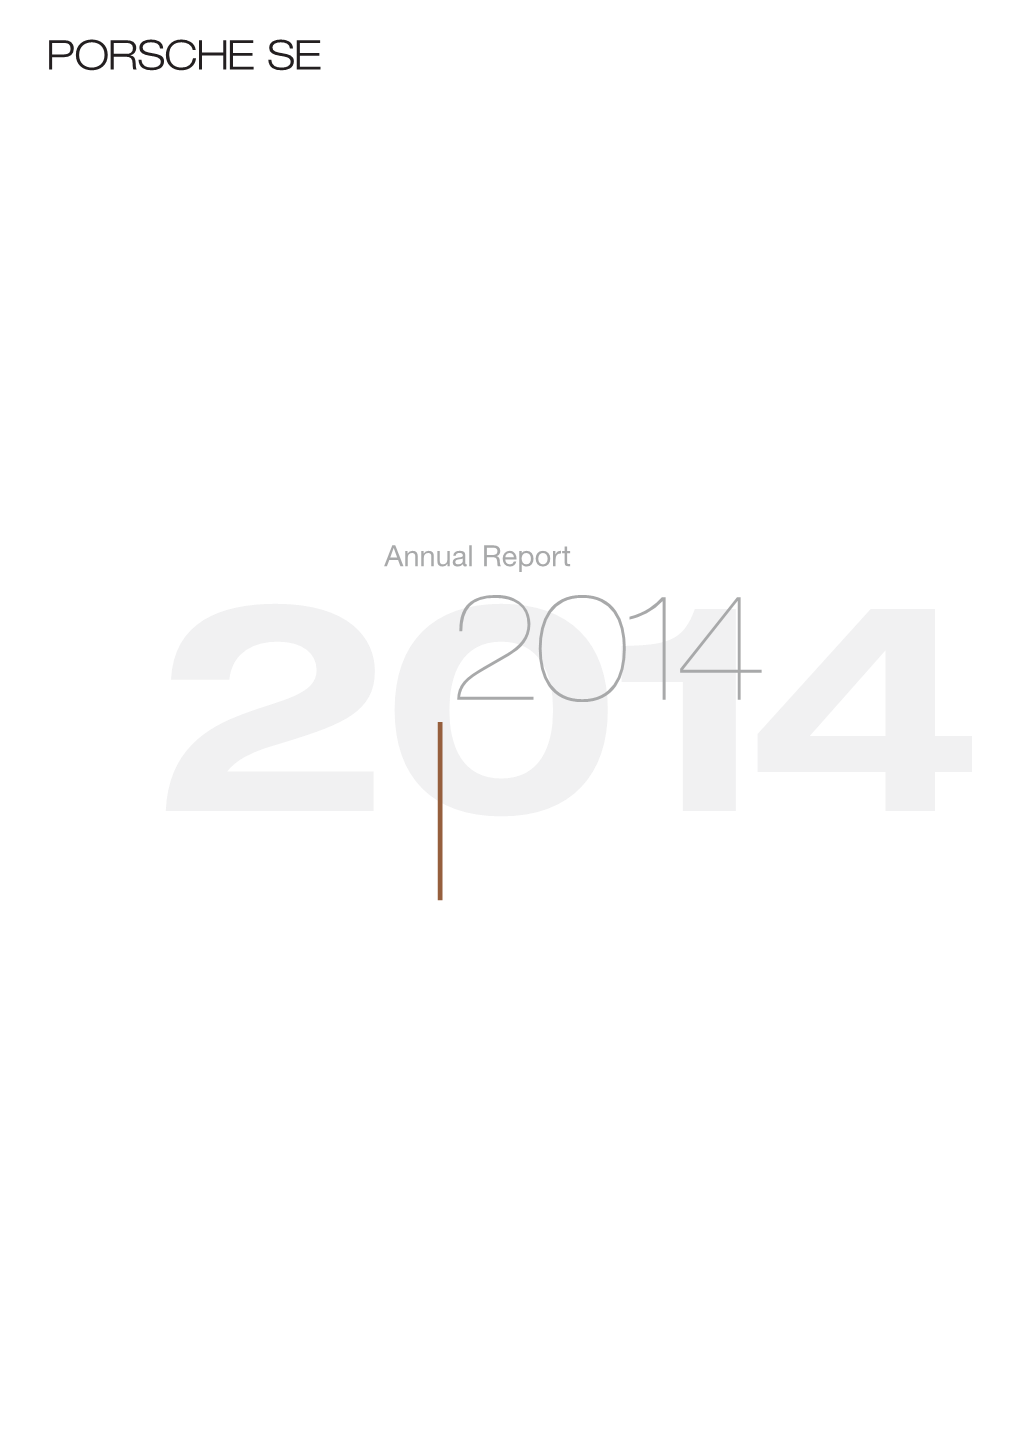 Annual Report Key Figures